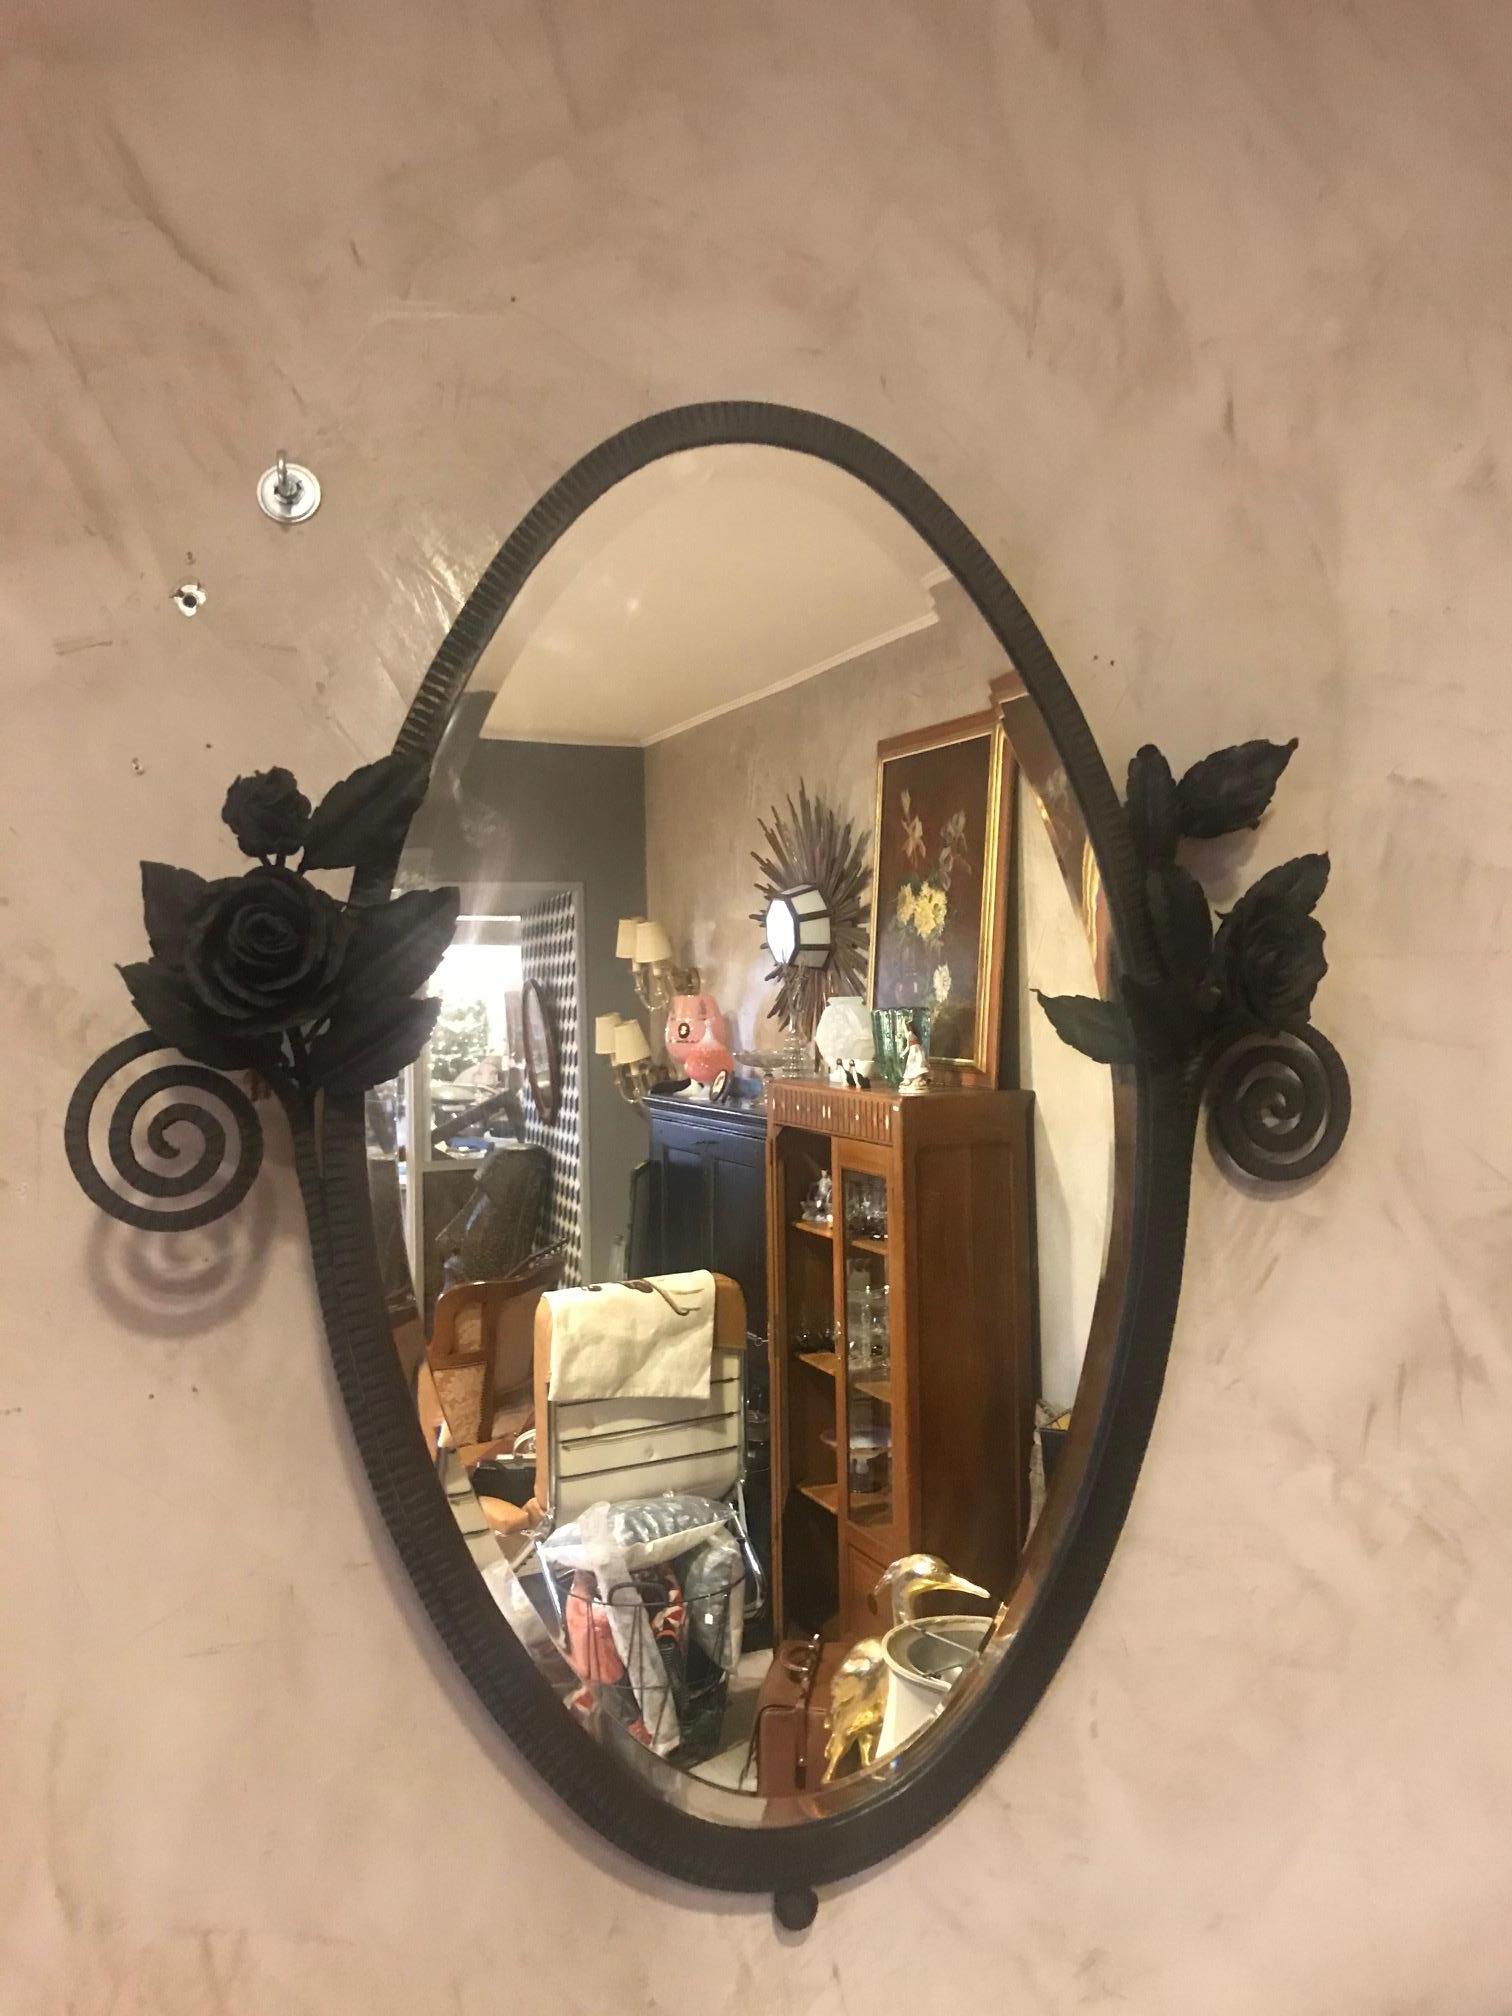 Beautiful 20th century French wrought iron and beveled glass mirror with very nice roses wrought iron decoration on each sides of the mirror from the 1925.
Stunning oval shape. Very good quality and condition.